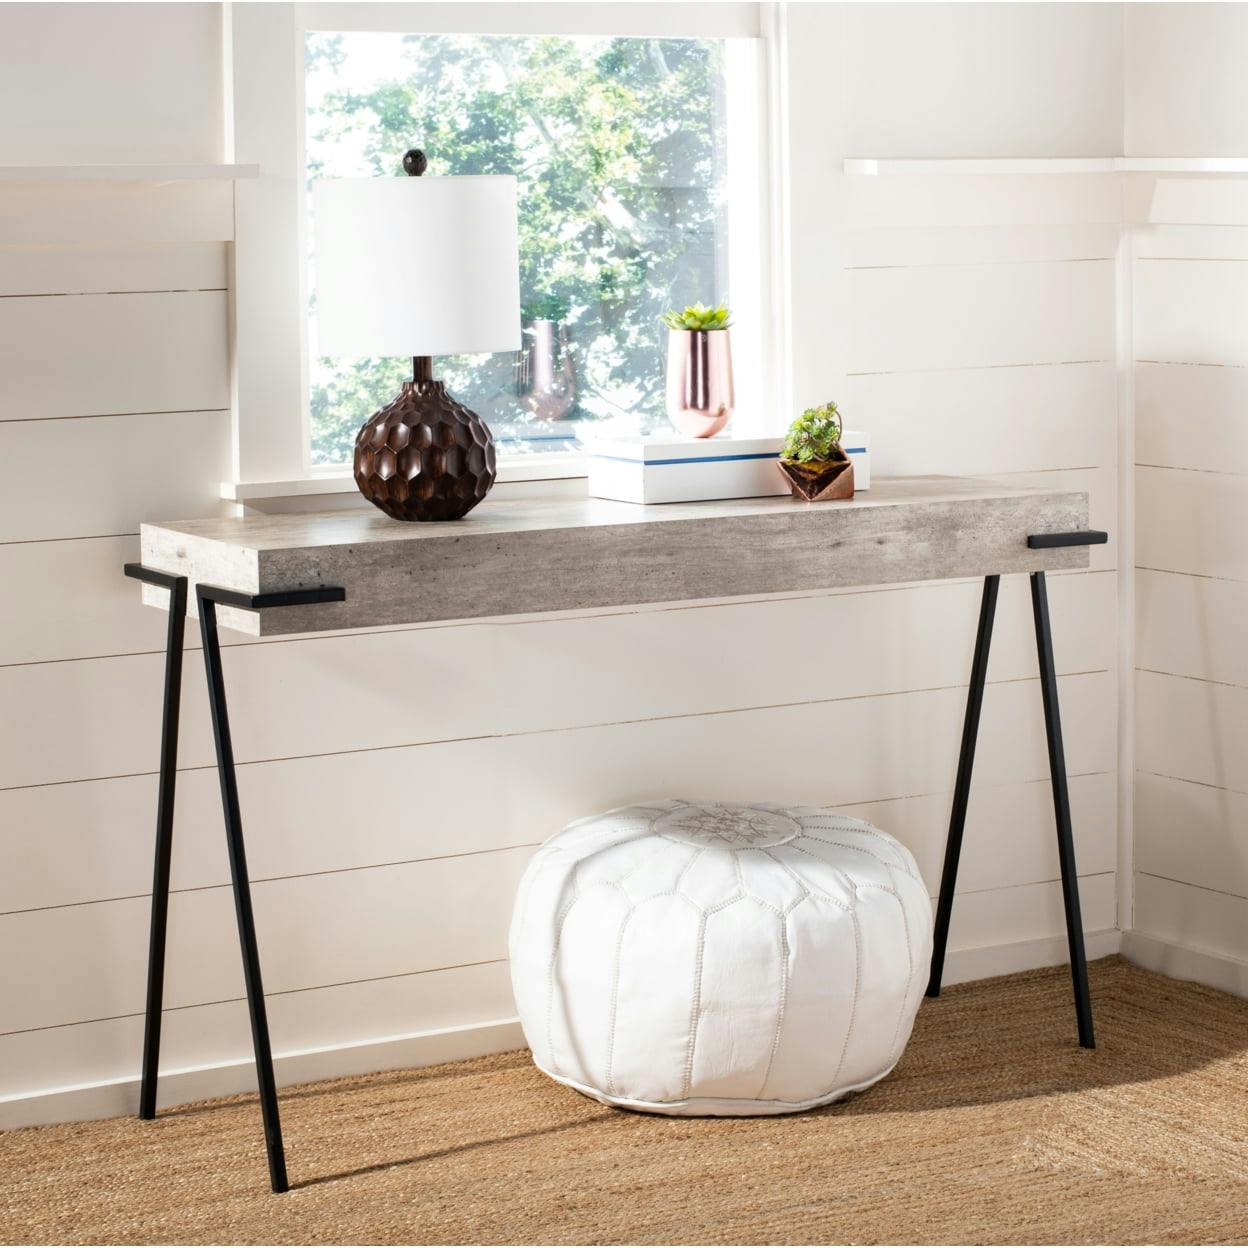 Lux Transitional Black & White Rectangular Console Table with Iron Legs